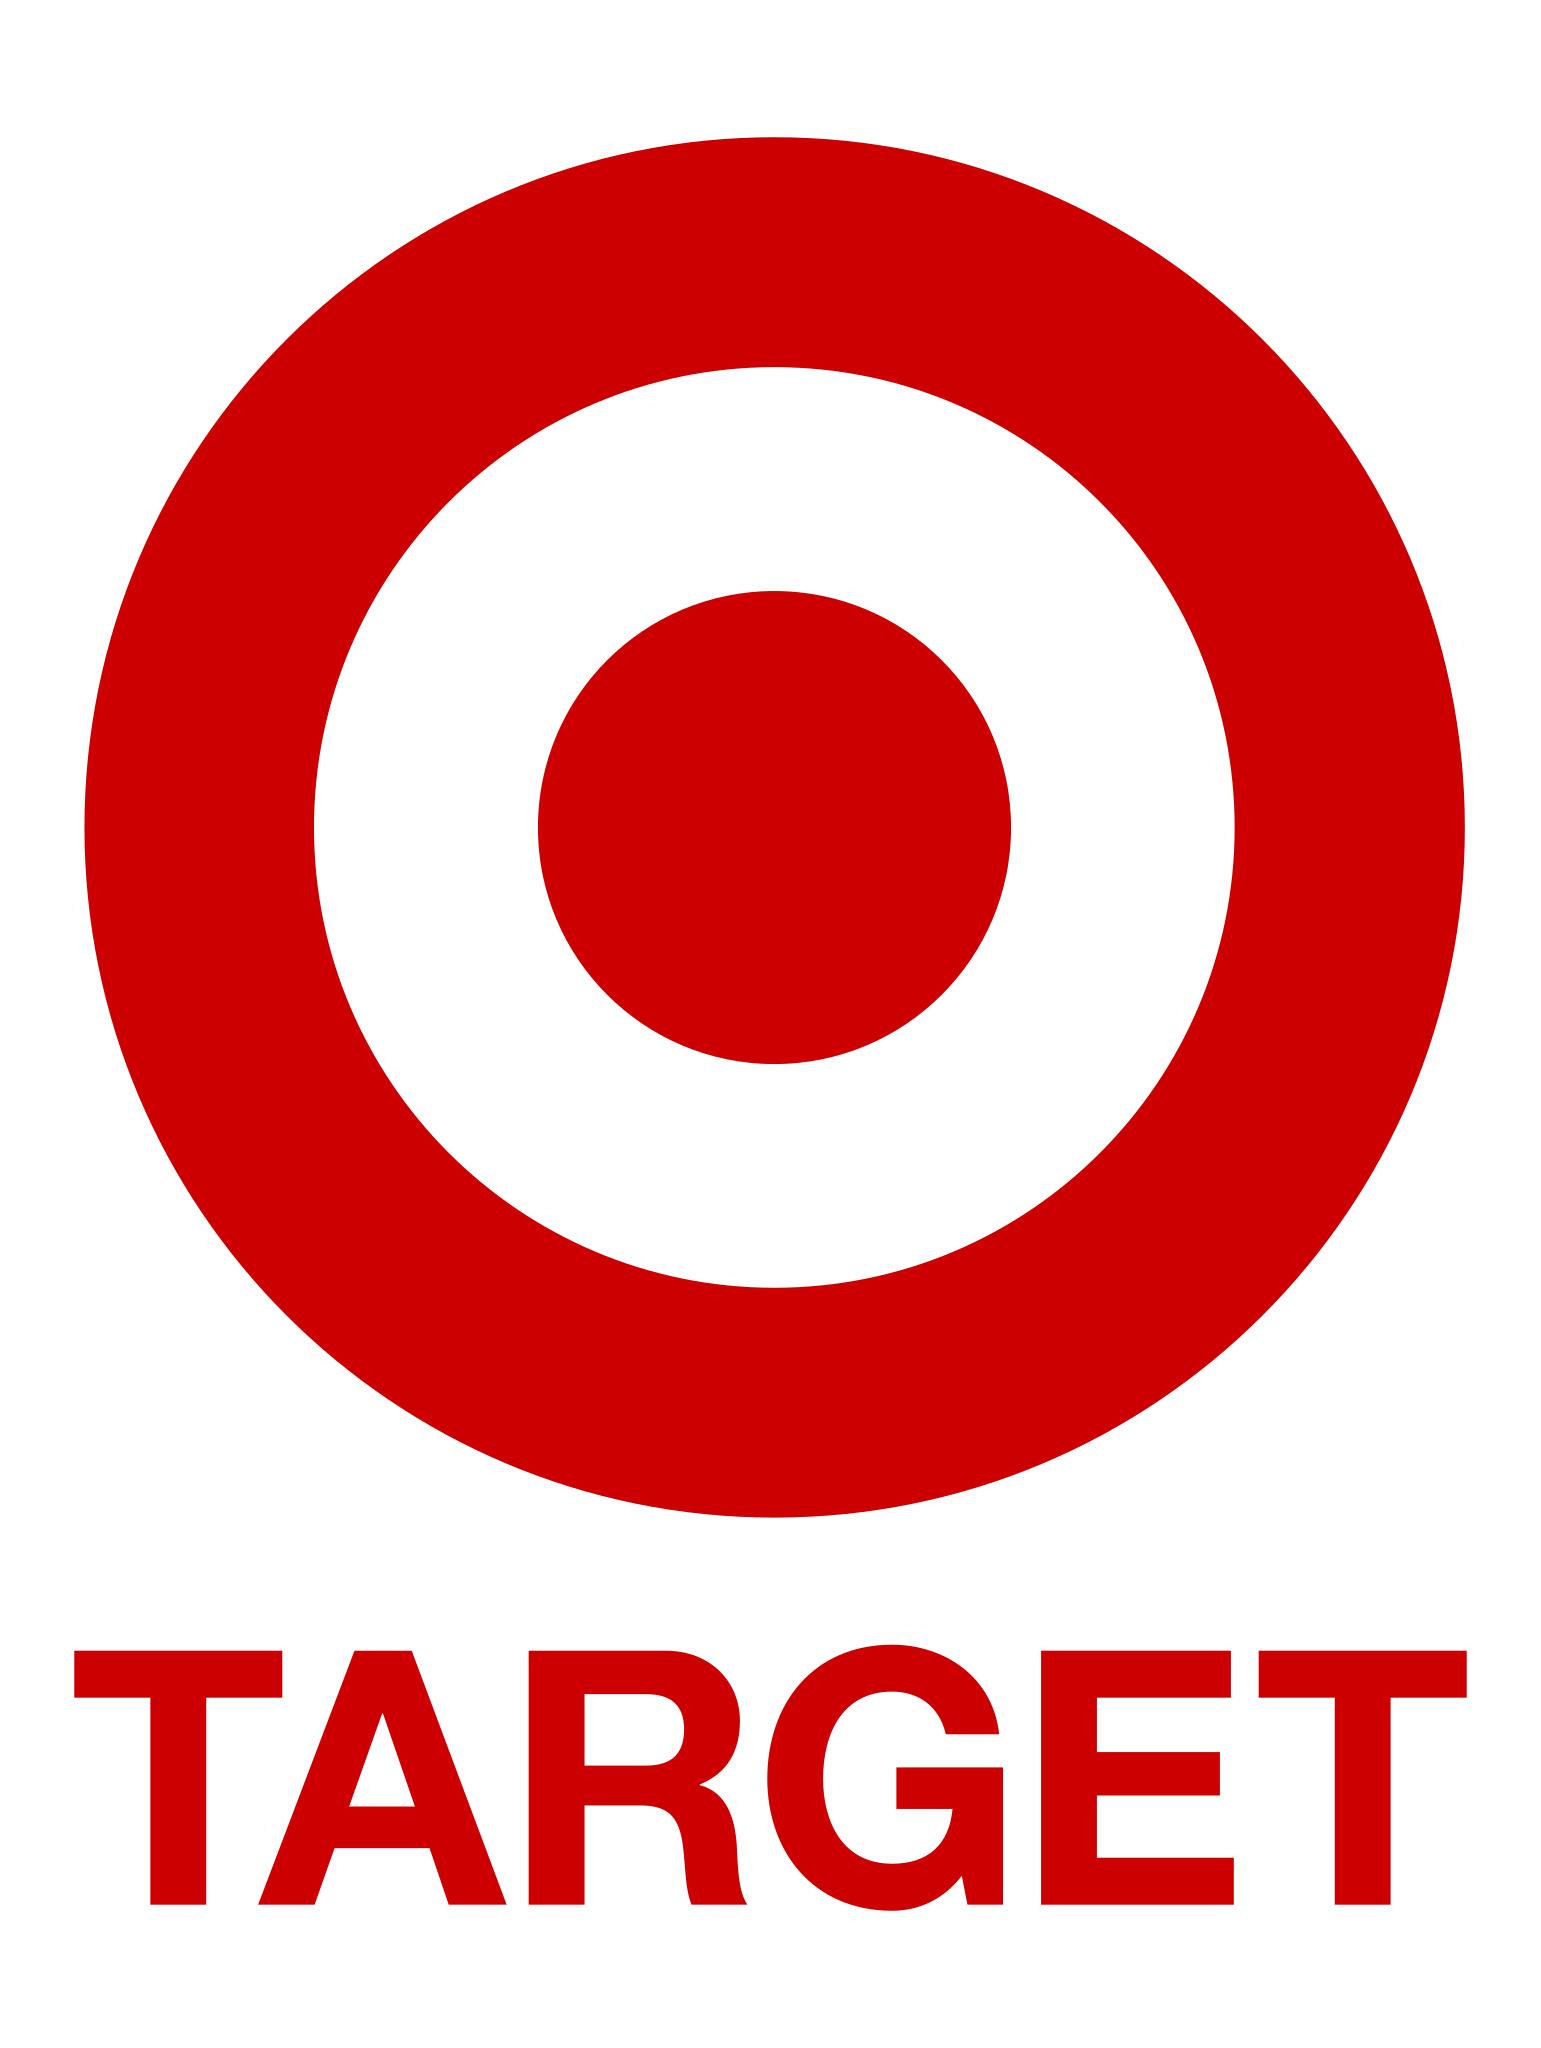 Military/Veterans - Get 10% off TWO qualifying purchases at Target STOREWIDE 29 OCT thru 11 NOV